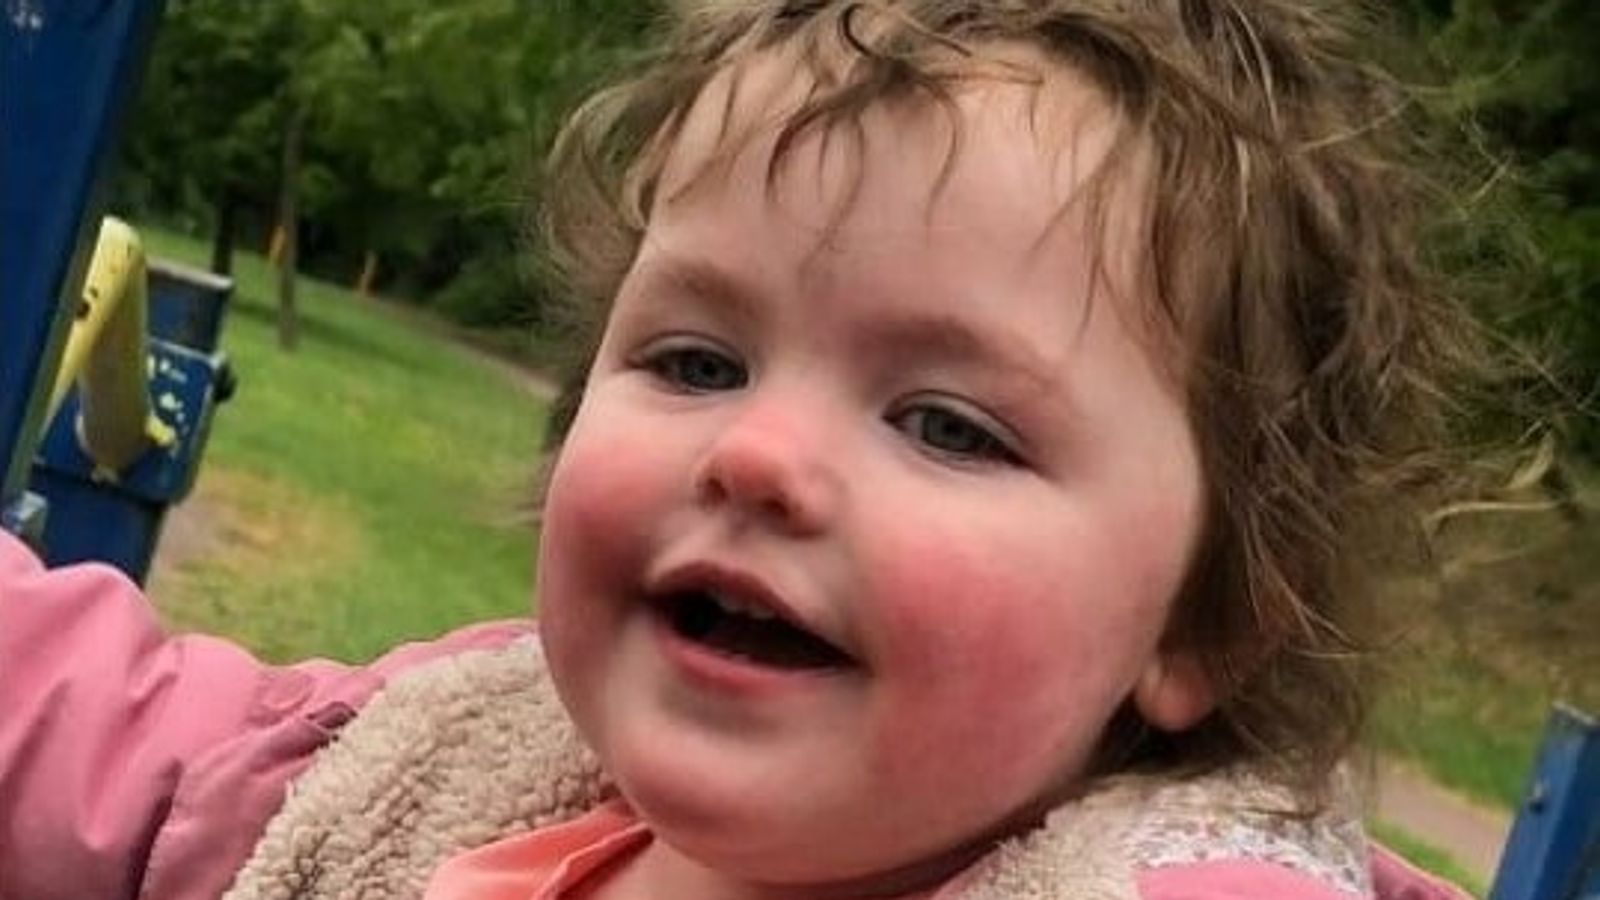 Alice Stones was mauled to death by a dog in her back garden